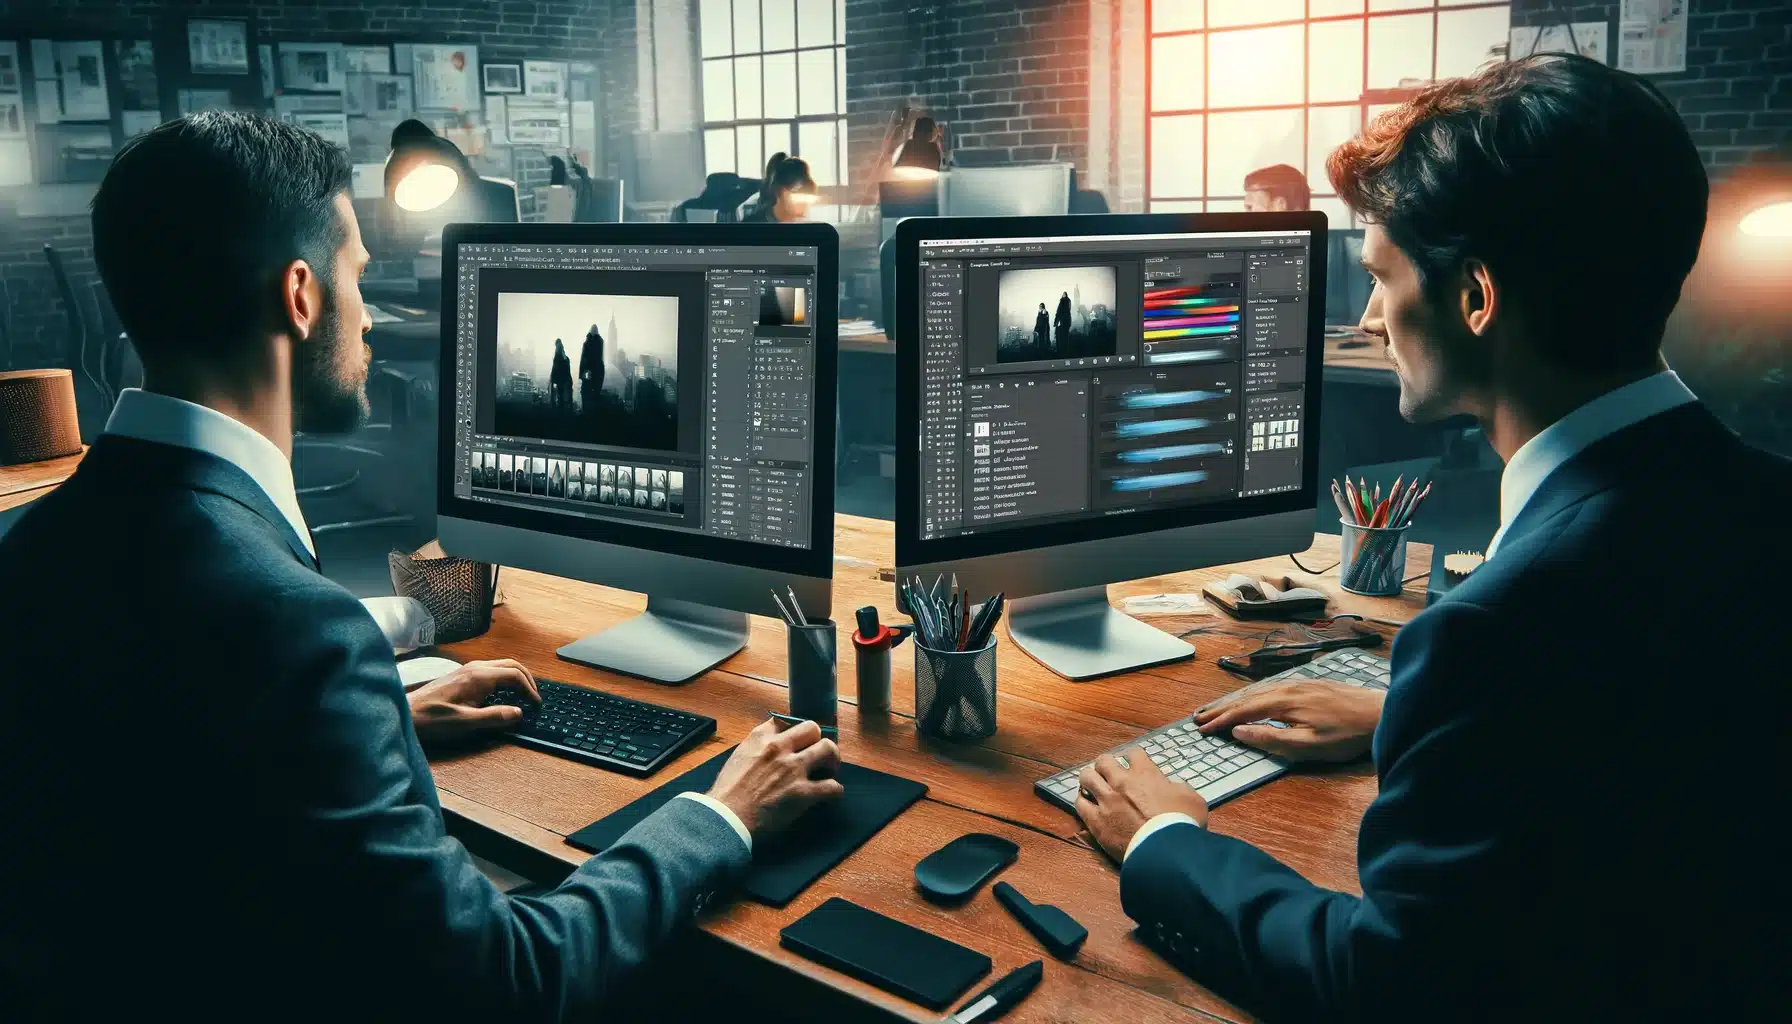 Two professionals in a modern office using desktop computers to edit farinaceous Portraits in PS, showcasing advanced tools and a collaborative environment.